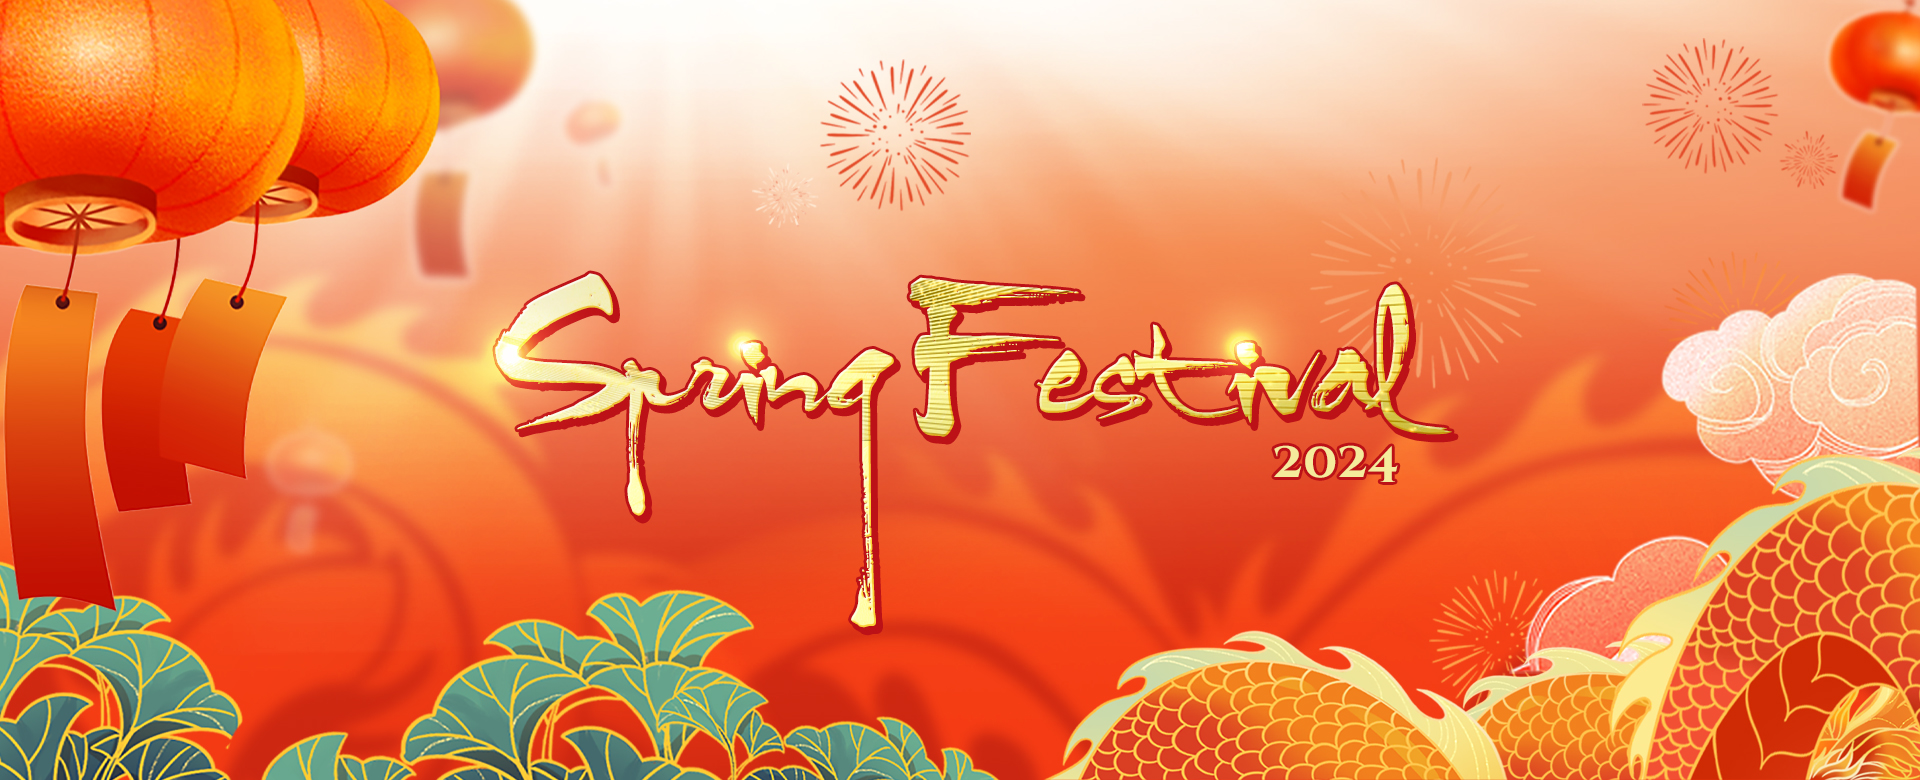 web banner for the report of spring festival 2024